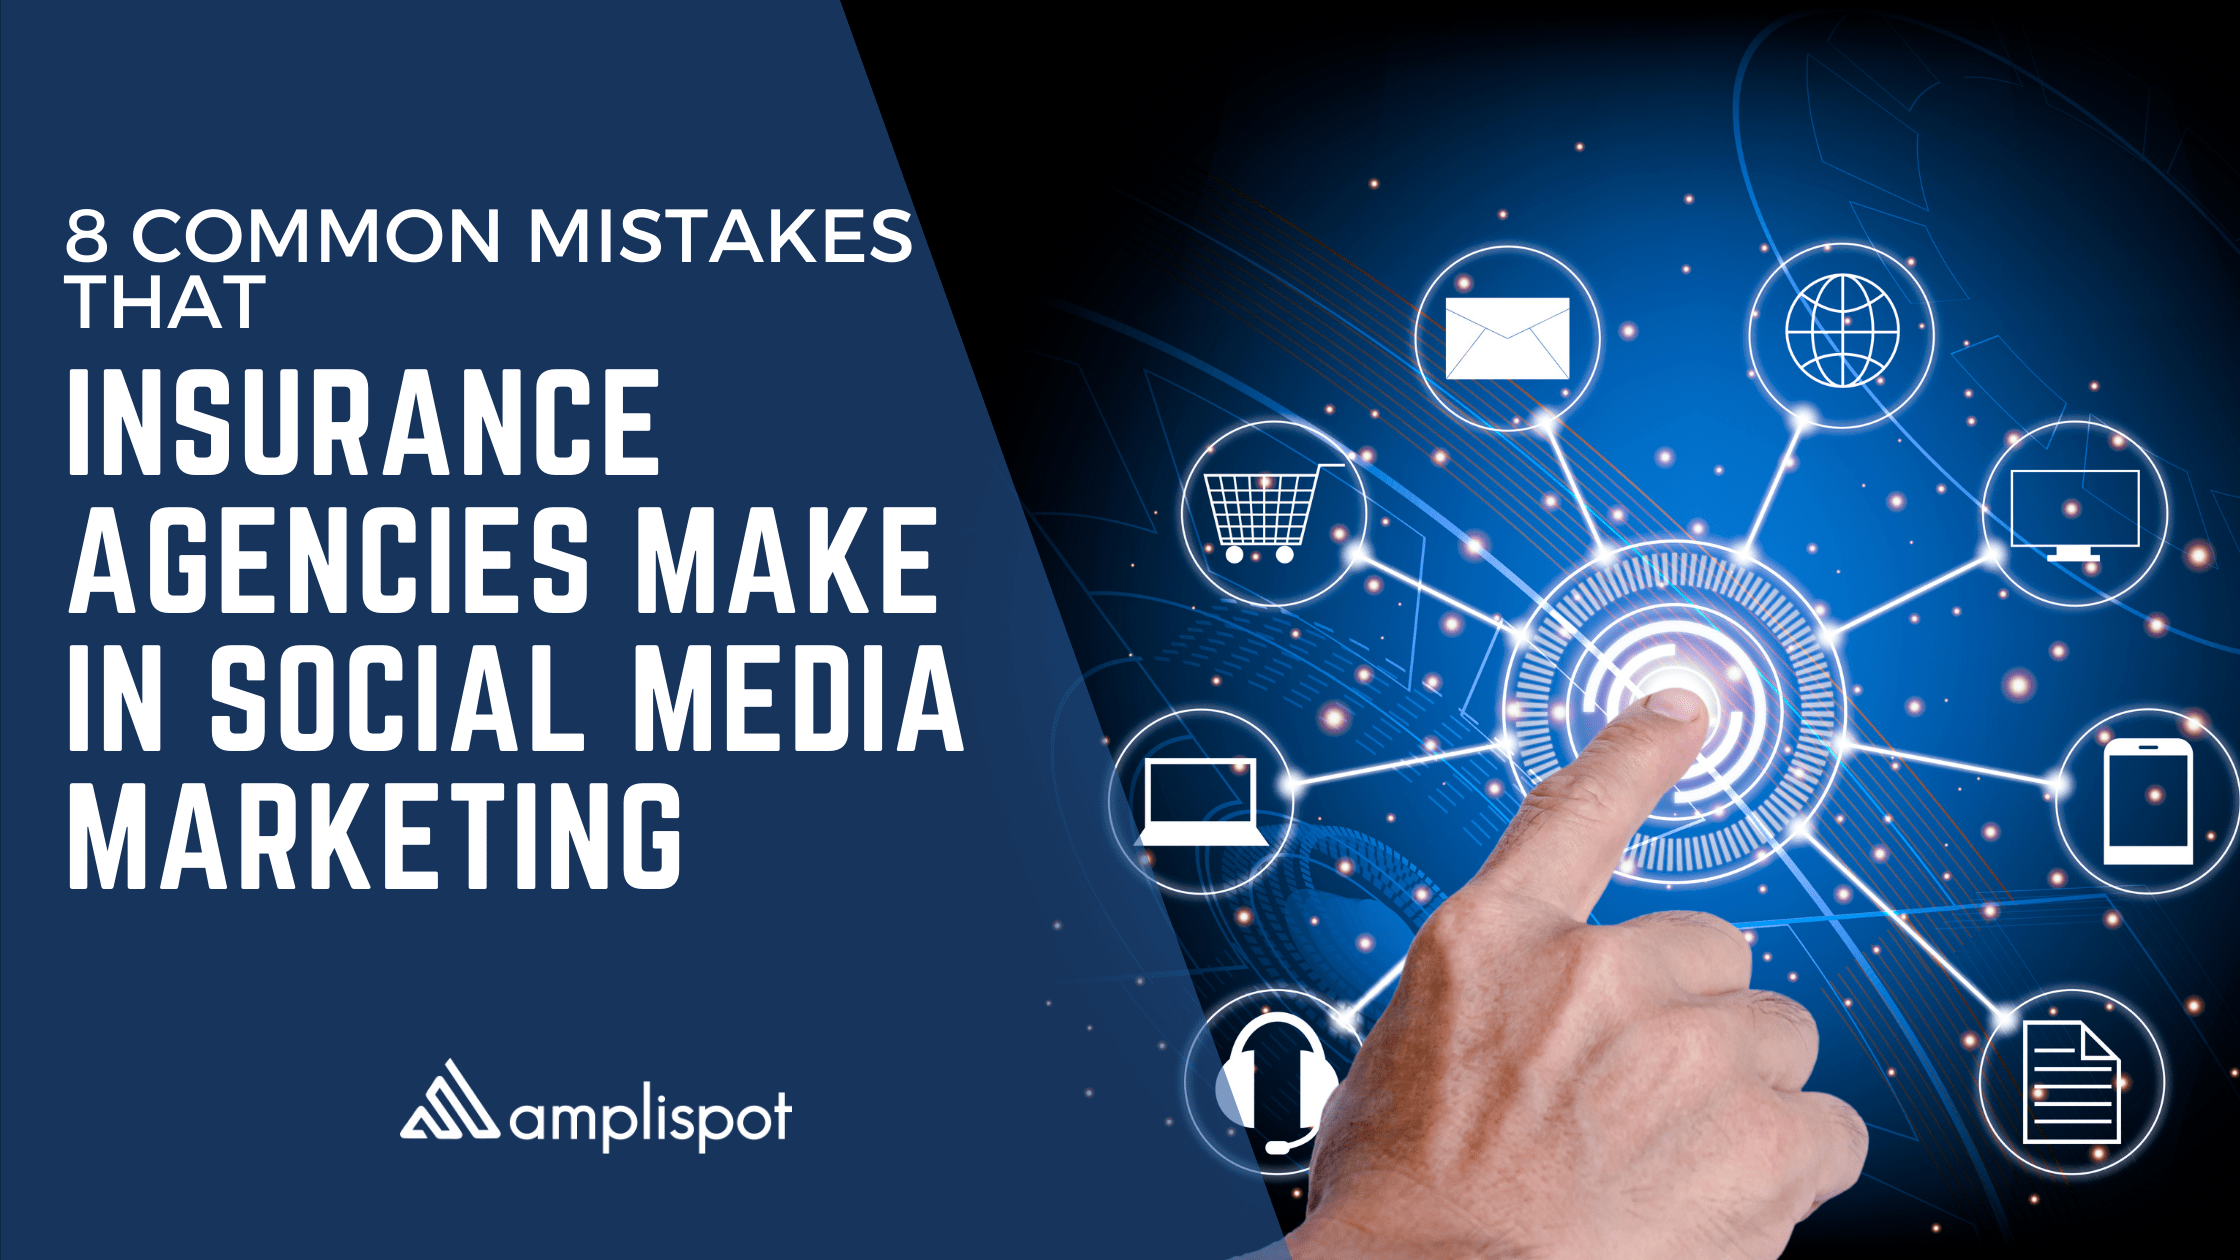 8 Common Mistakes That Insurance Agencies Make in Social Media Marketing